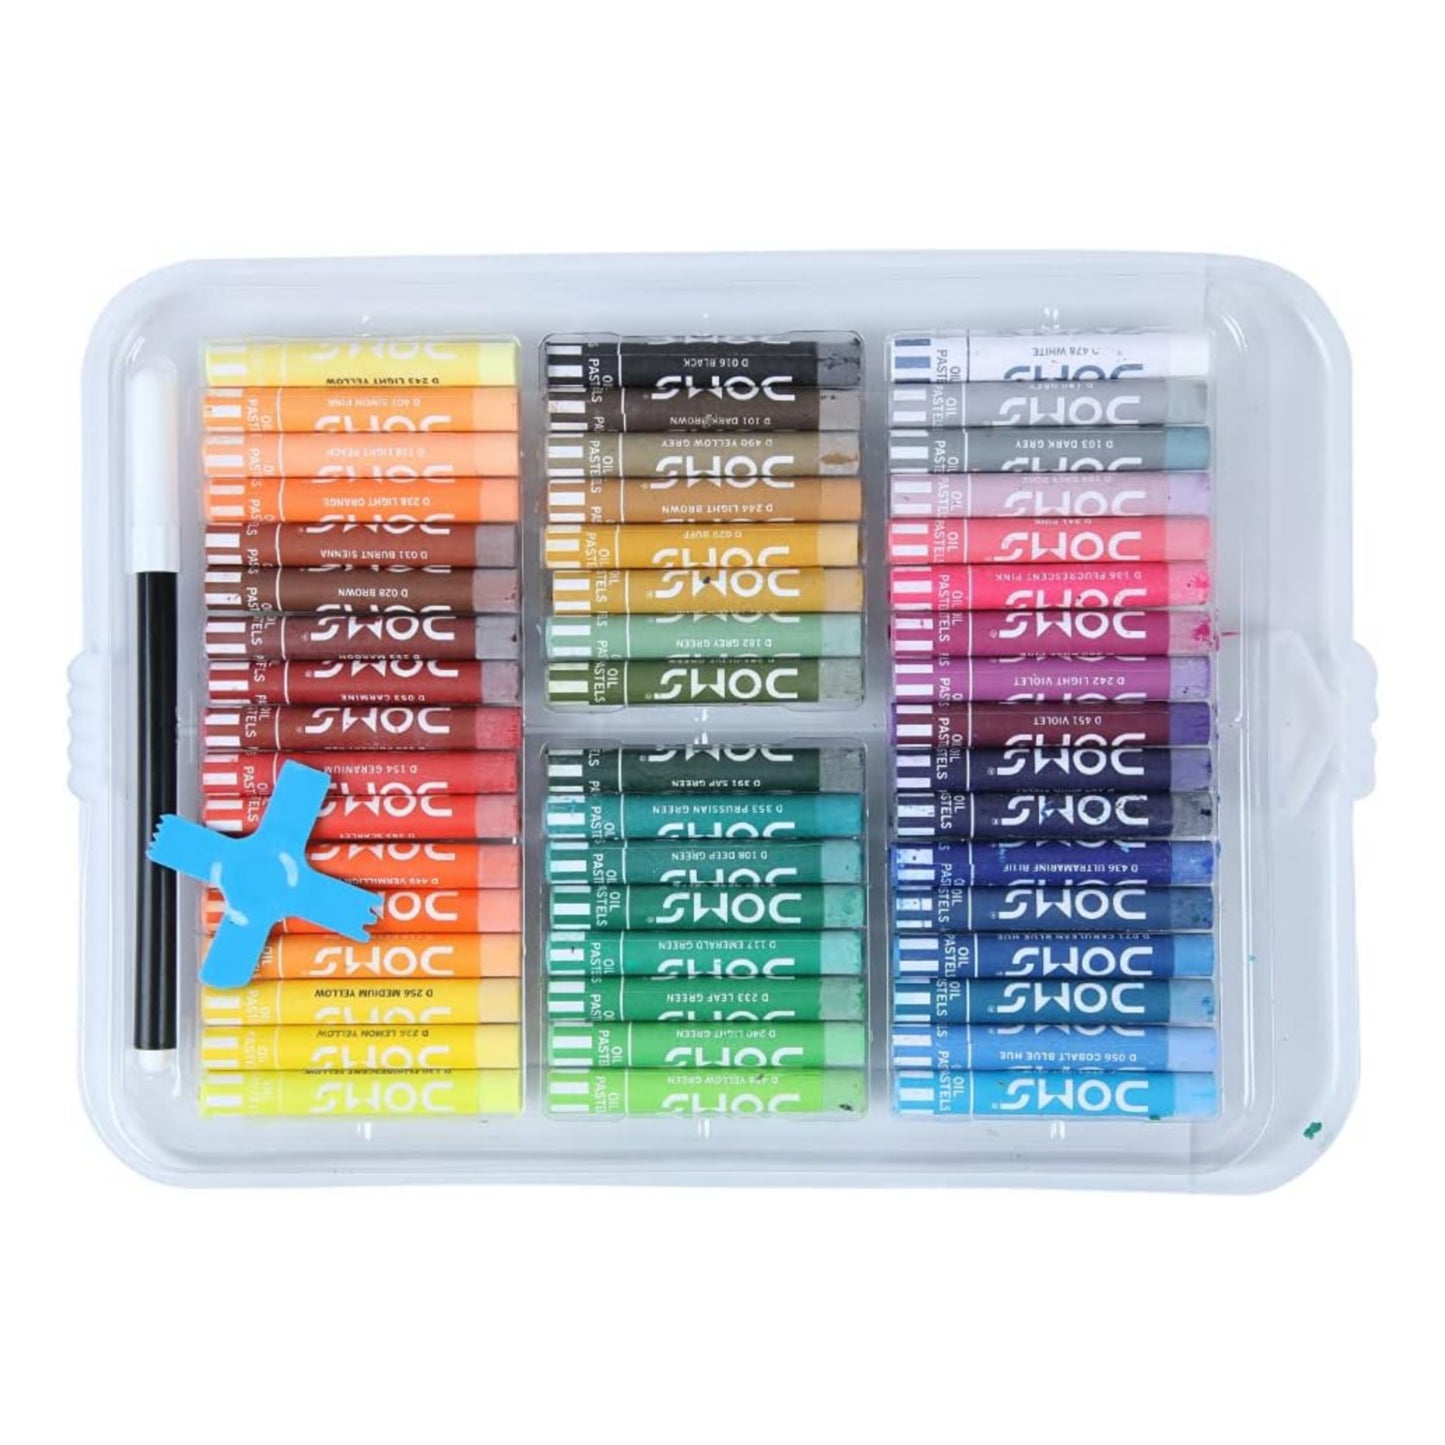 Doms 50 Shades Oil Pastel With Case|Smooth Color Intermixing For Better Effect|Bright&Intense Colors|Free Scrapping Tool|Non-Toxic&Safe For Childrens